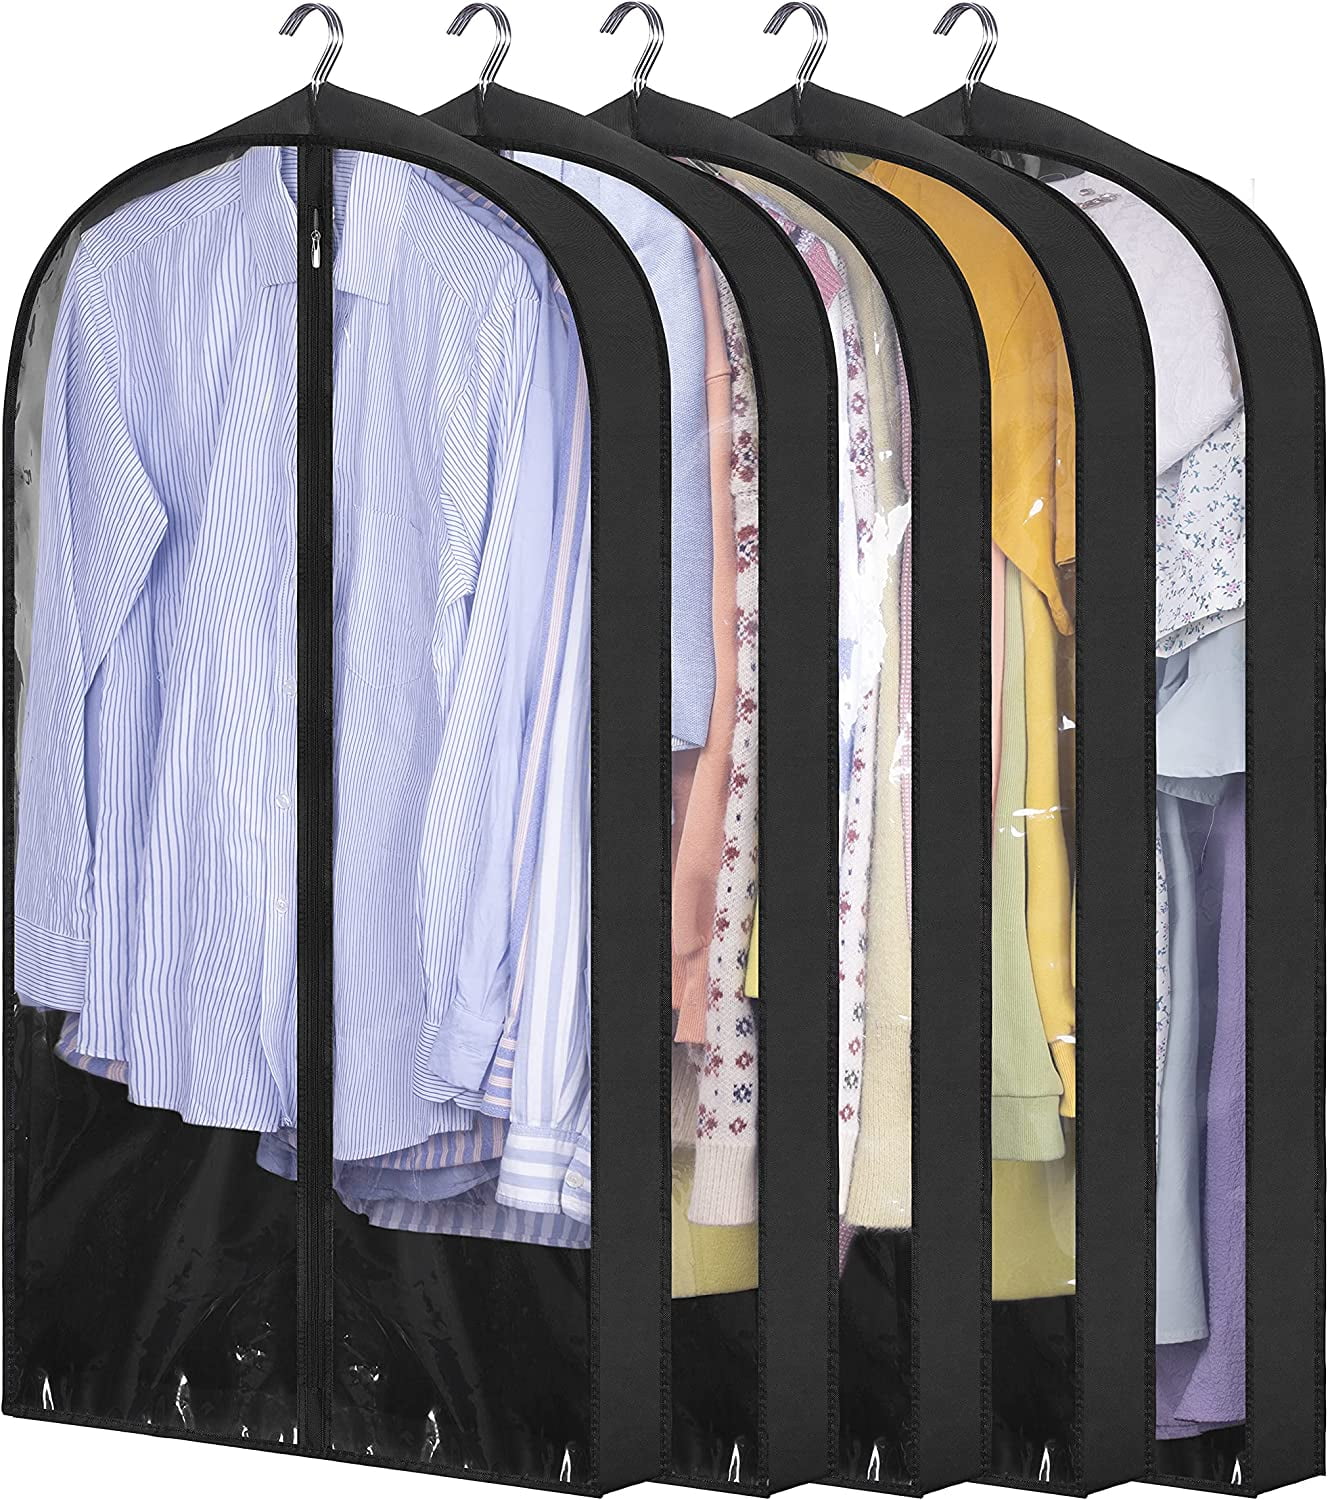 SORON 43 Garment Bags, 7 Packs Garment Bags for Hanging Clothes,  Env-friendly Breathable Suit Bag Clothes Cover for Storage Suits, shirts,  T-shirts